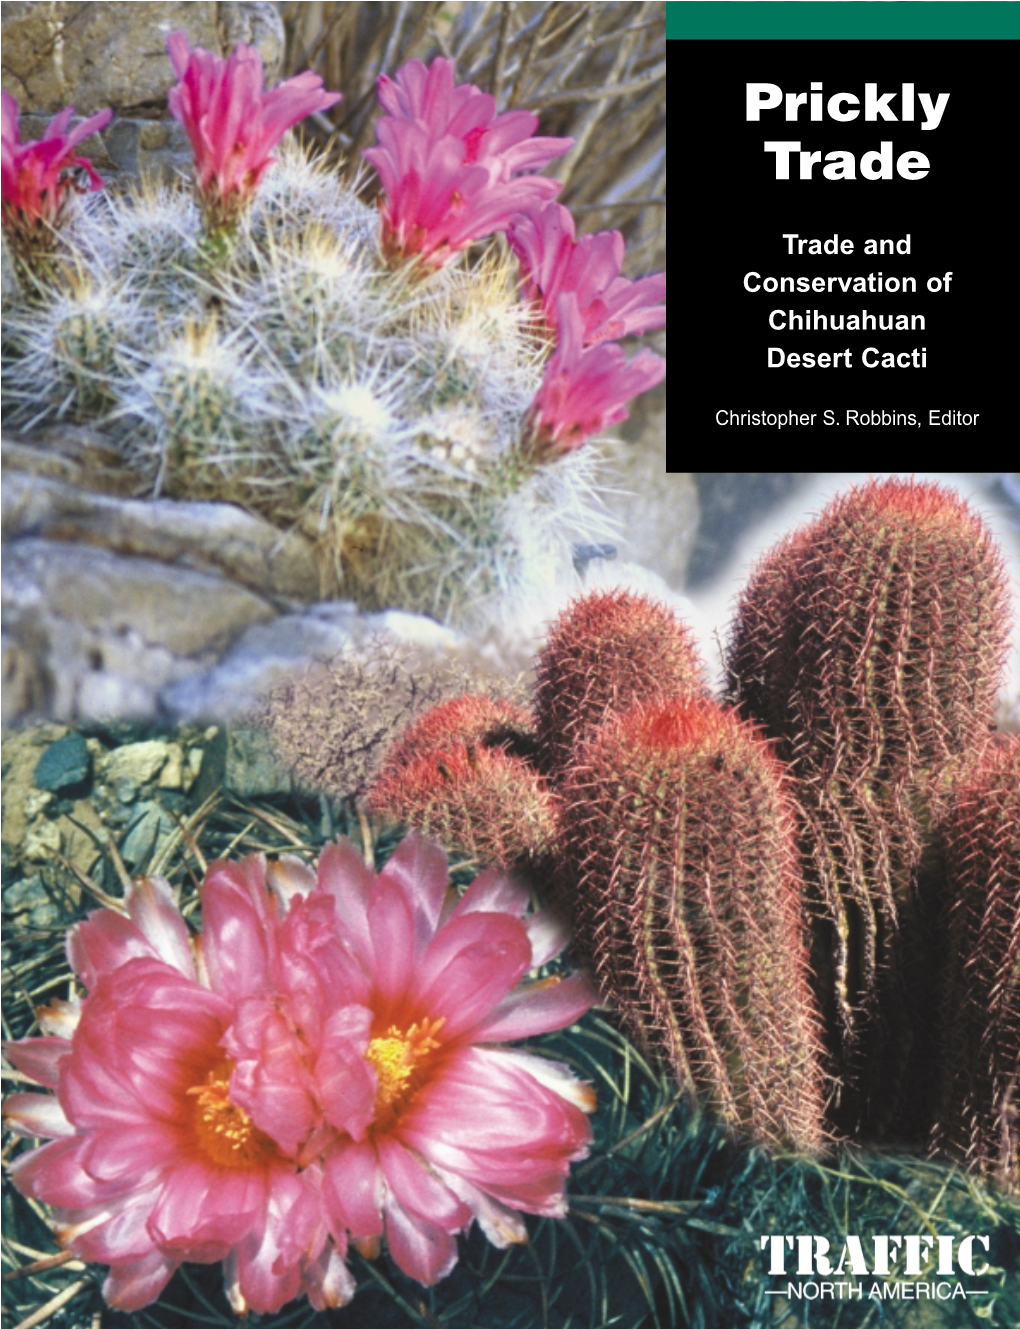 Trade & Conservation of Chihuahuan Desert Cacti